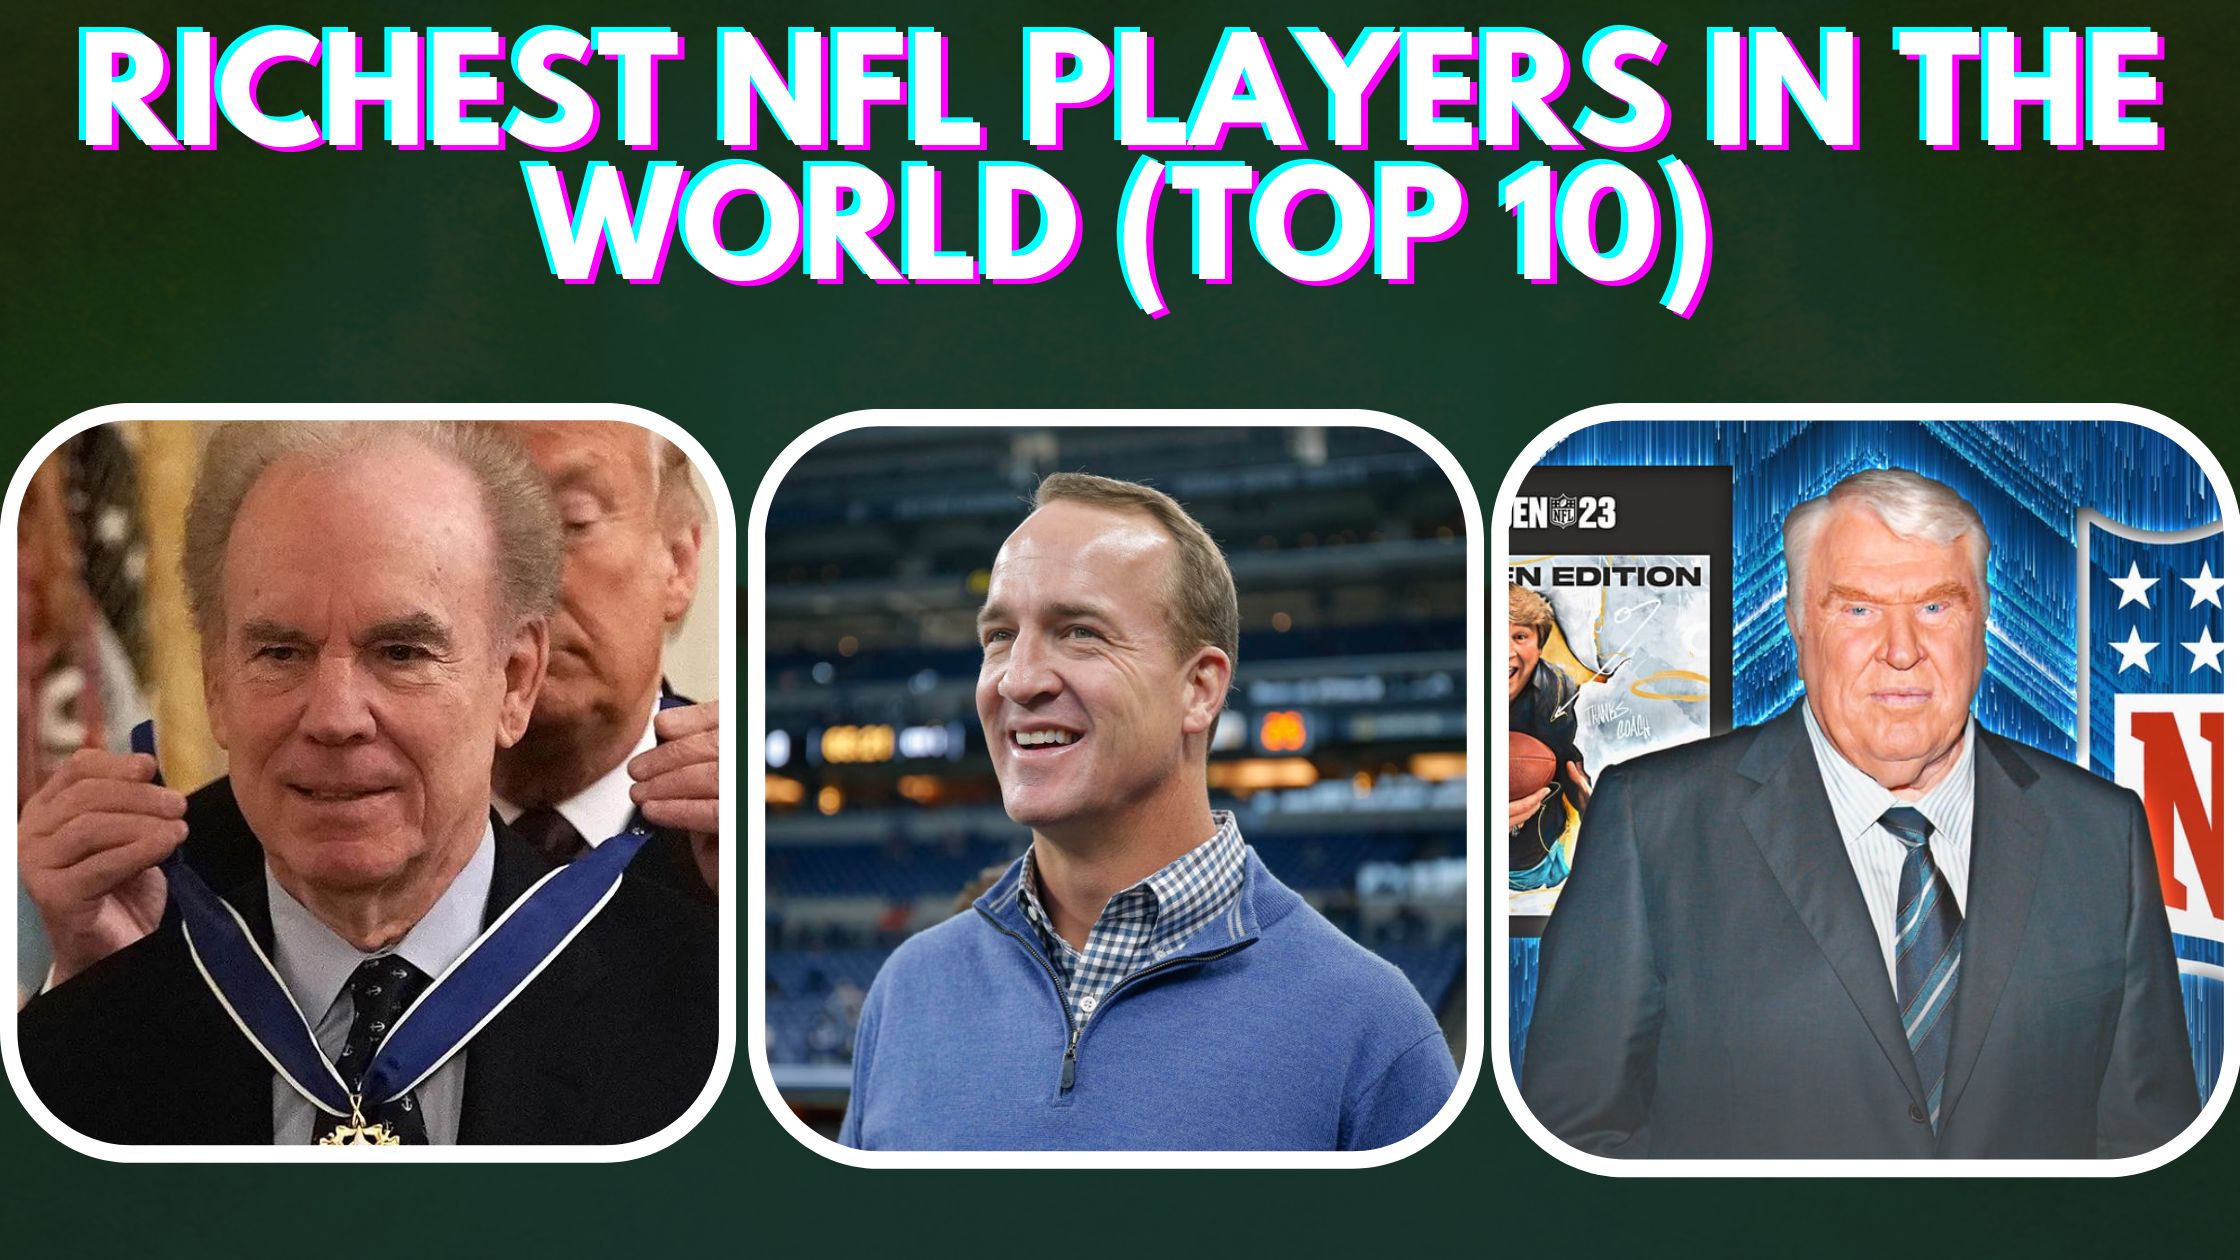 richest nfl players in the world (top 10)